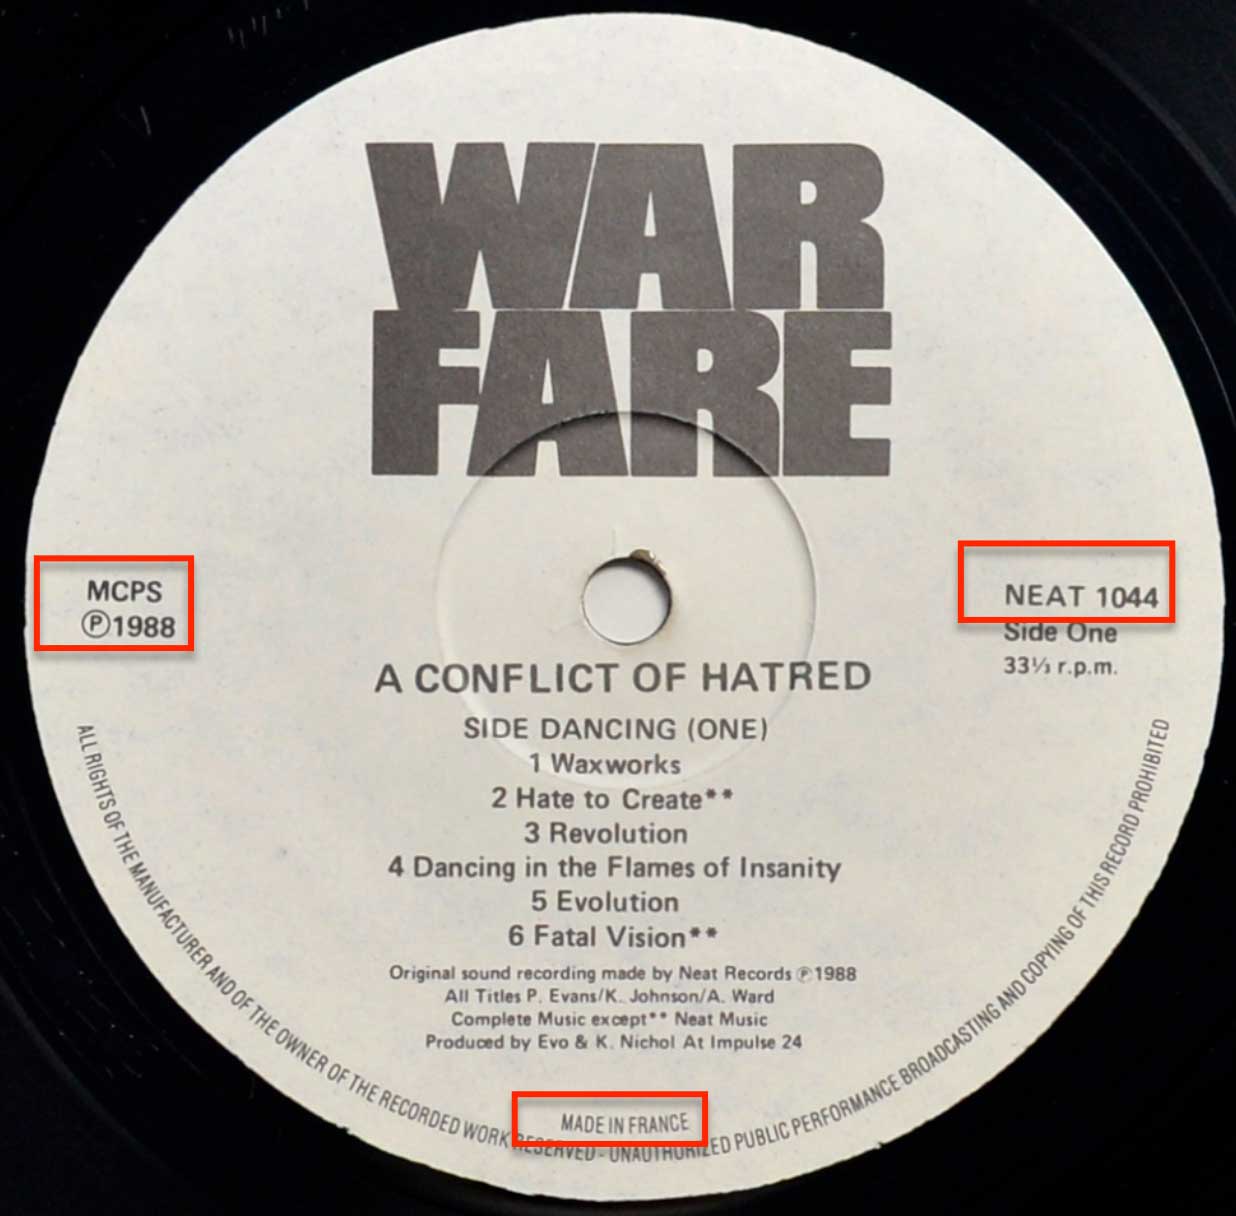 Photo of record label of WARFARE - A Conflict of Hatred 